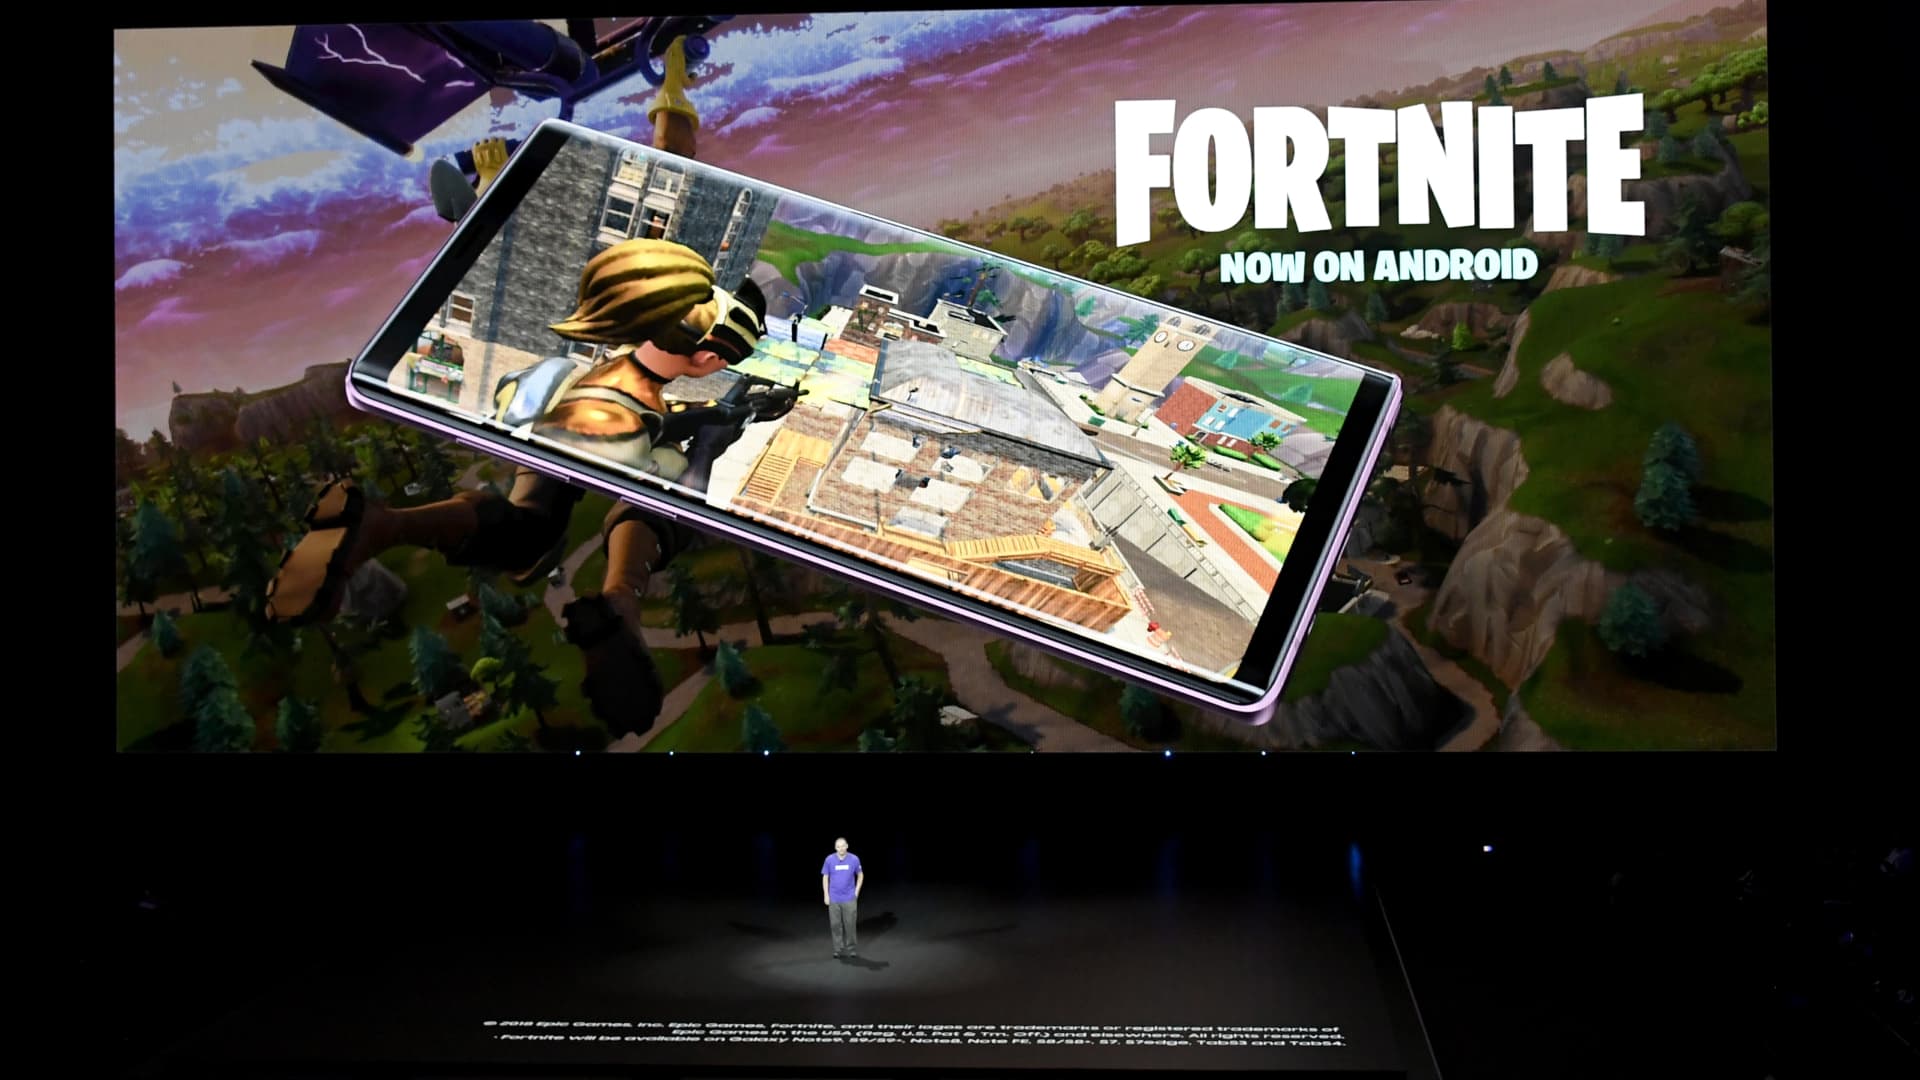 Fortnite is coming back to iOS thanks to Nvidia's cloud gaming web